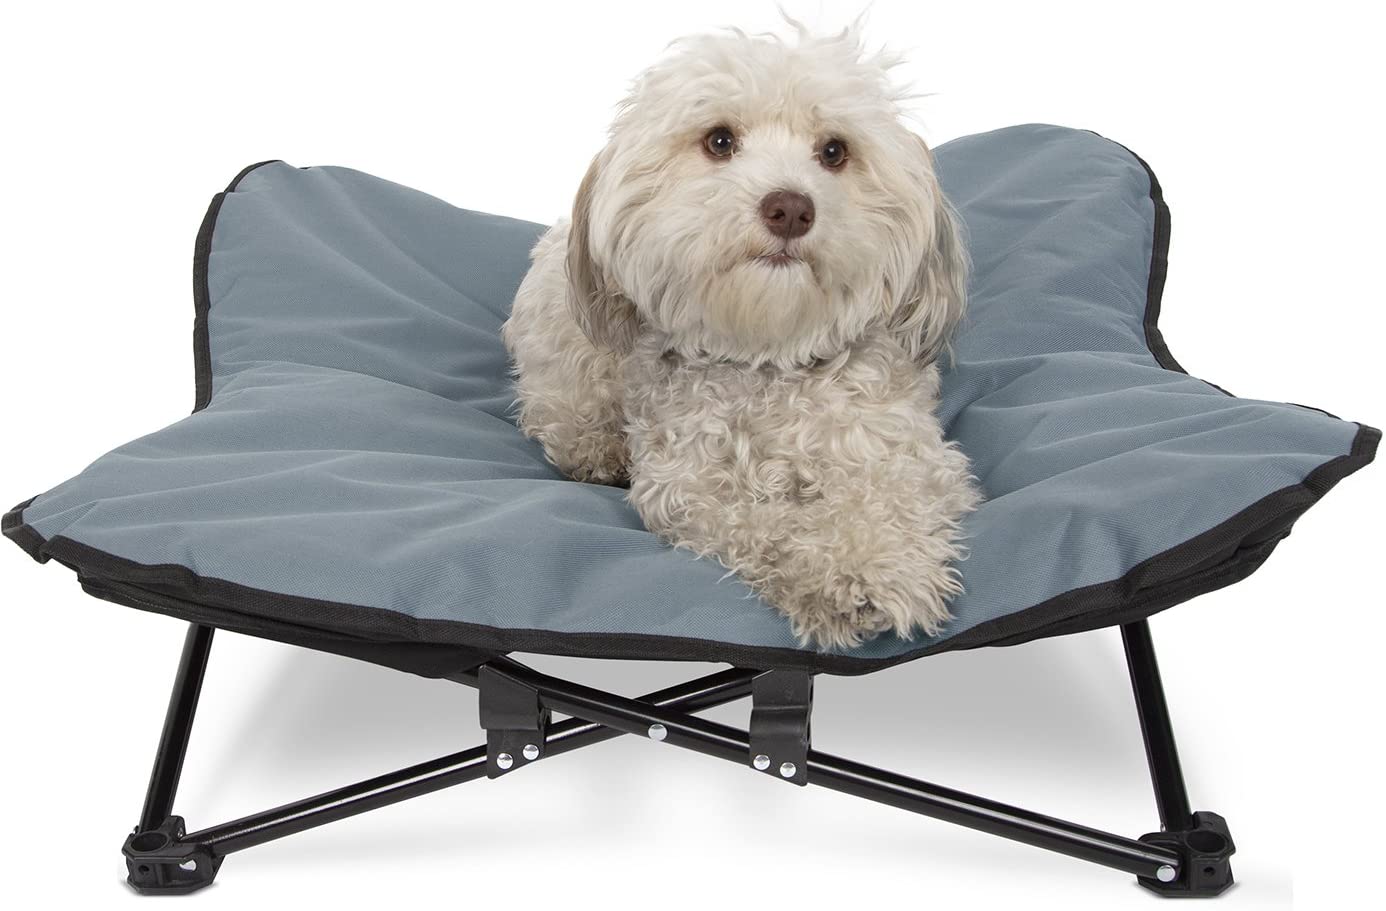 Paws & Pals – Raised Dog Cot